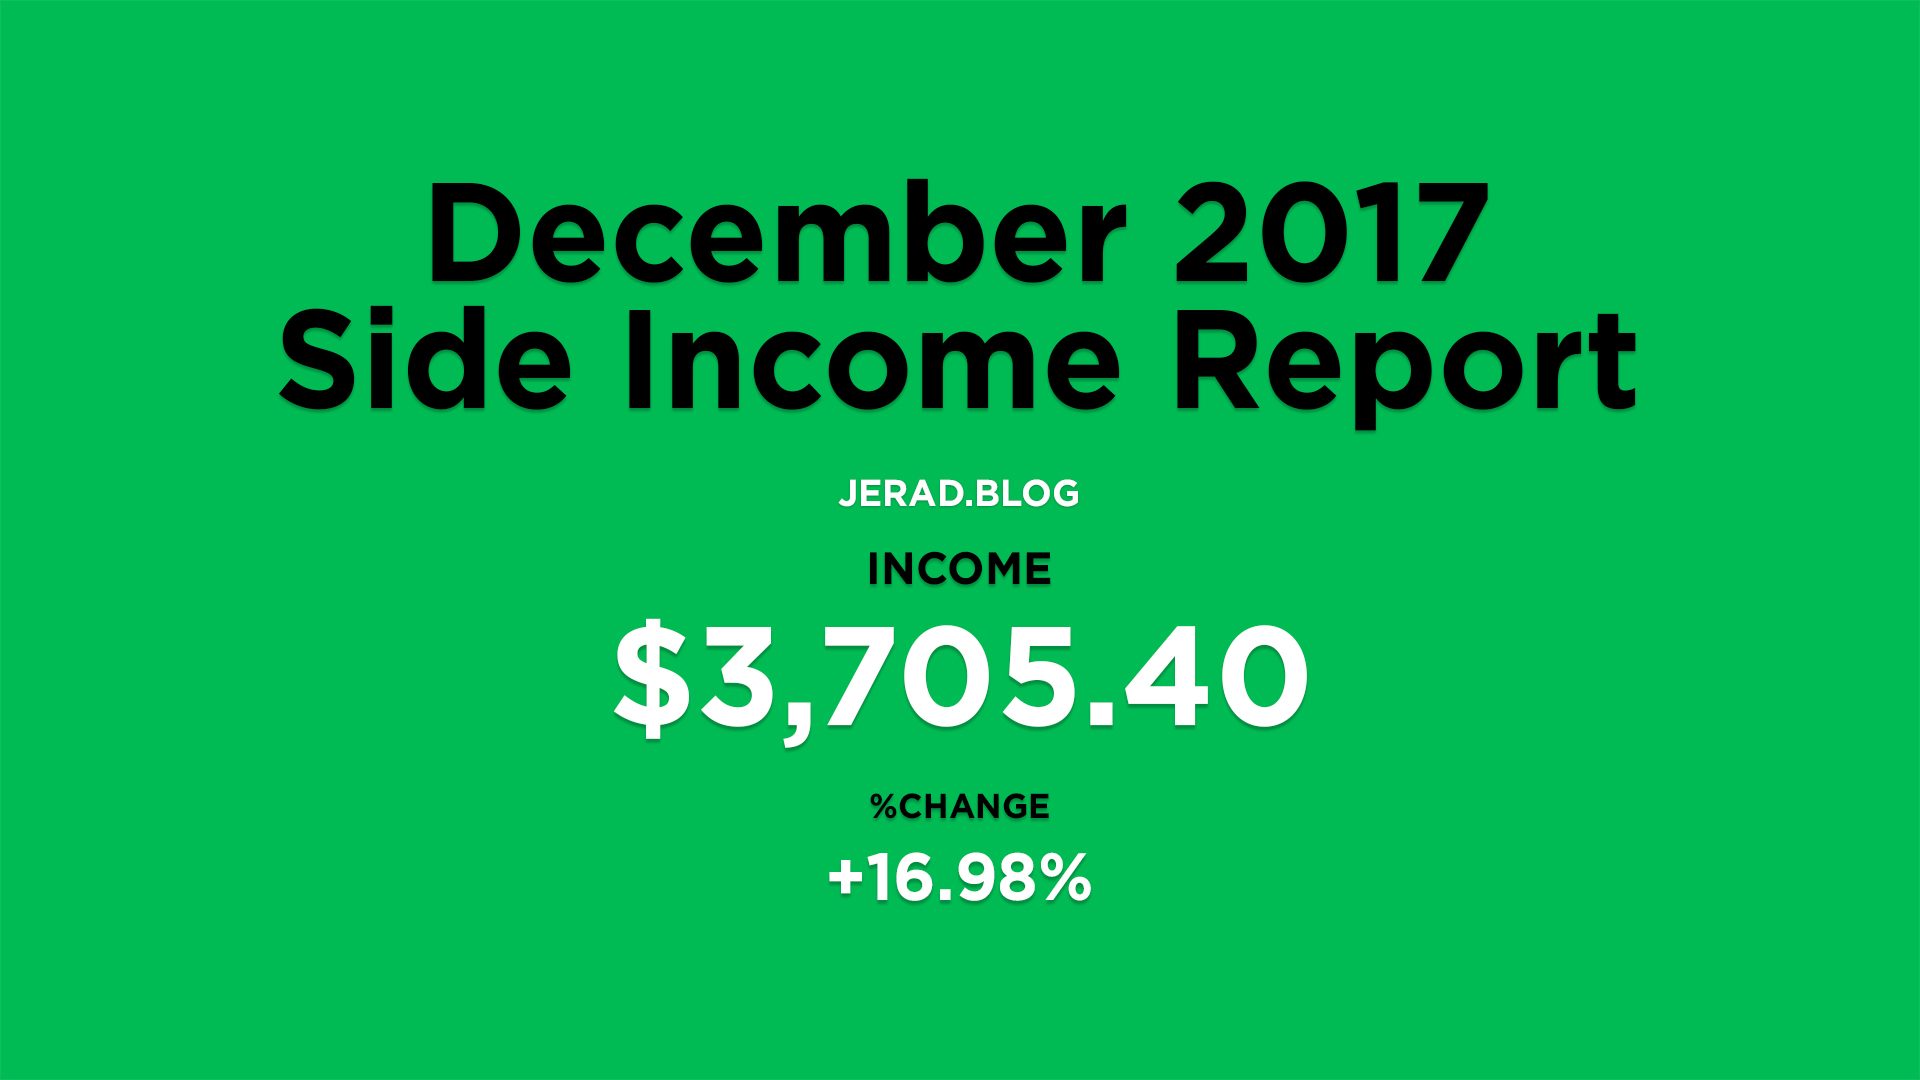 December 2017 Side Income Report